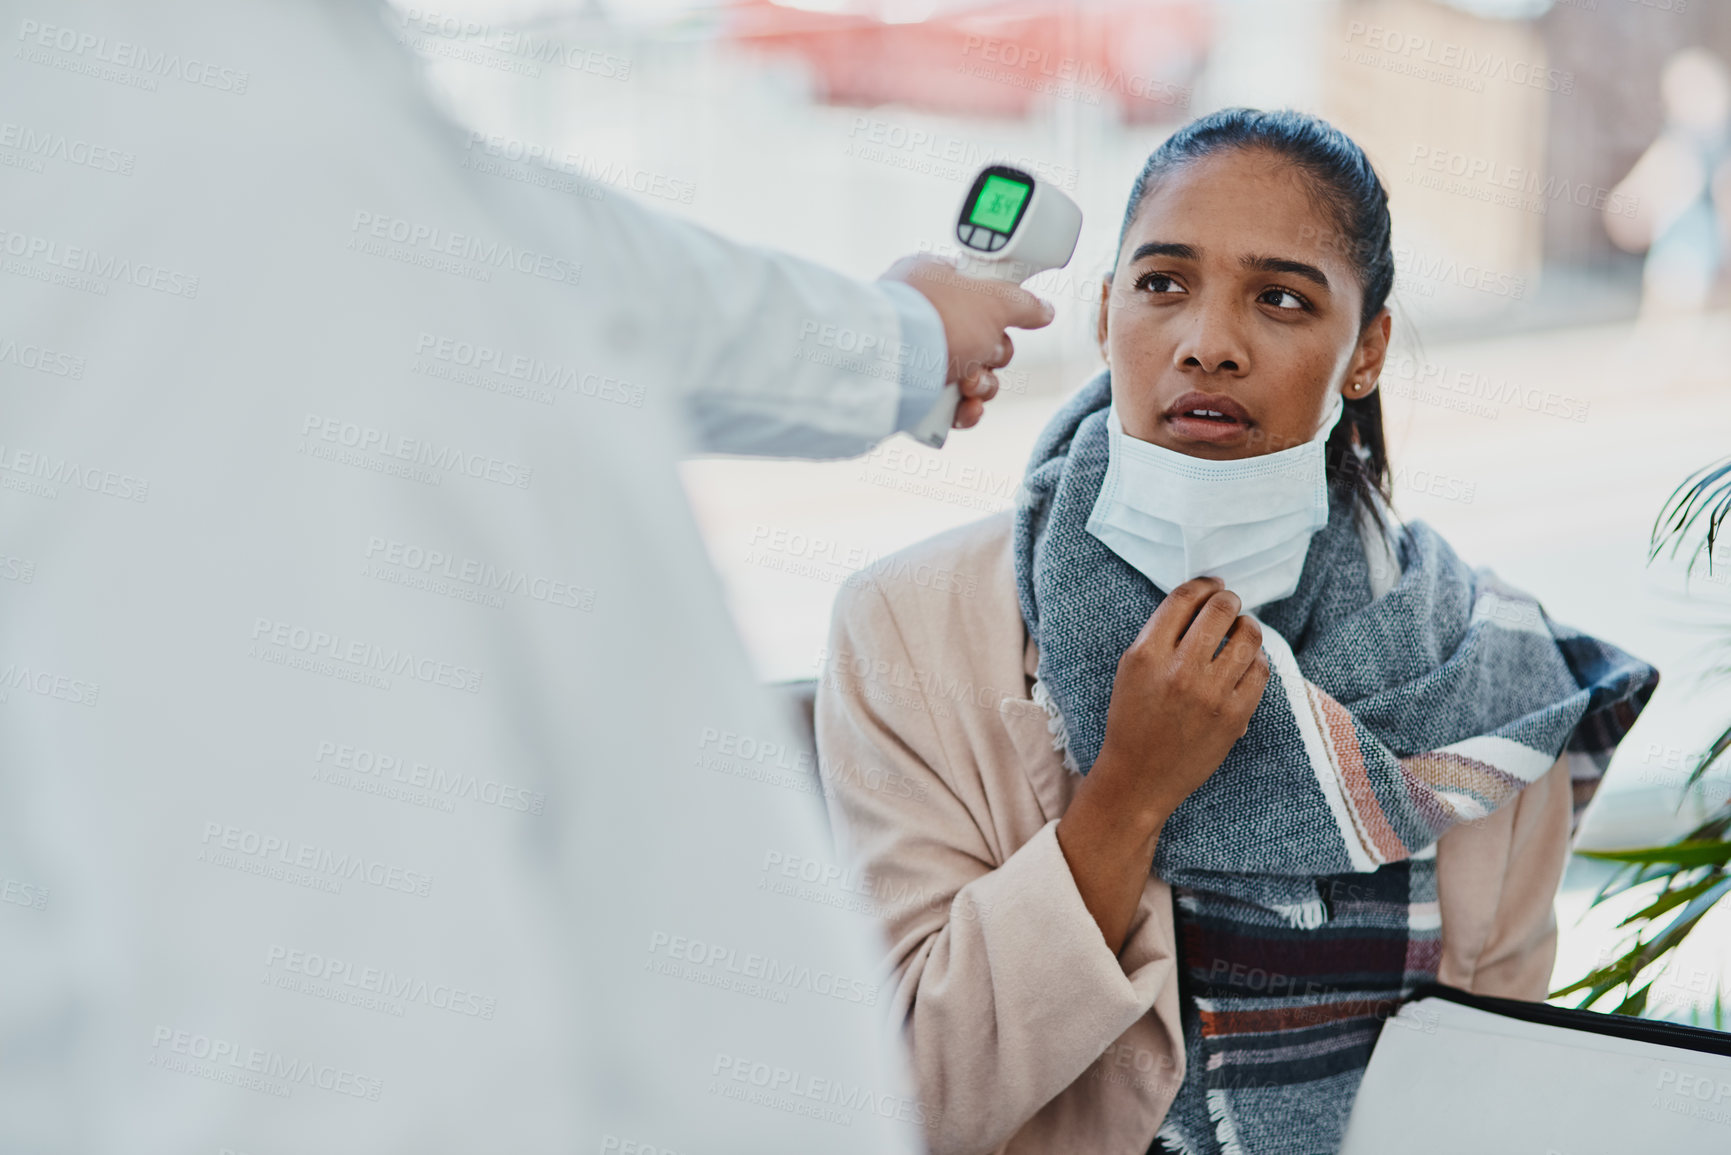 Buy stock photo Covid temperature scanning a woman head at the border or an airport with real scared, concerned and serious expression on her face. Traveling refugee or foreign lady with a face mask in quarantine